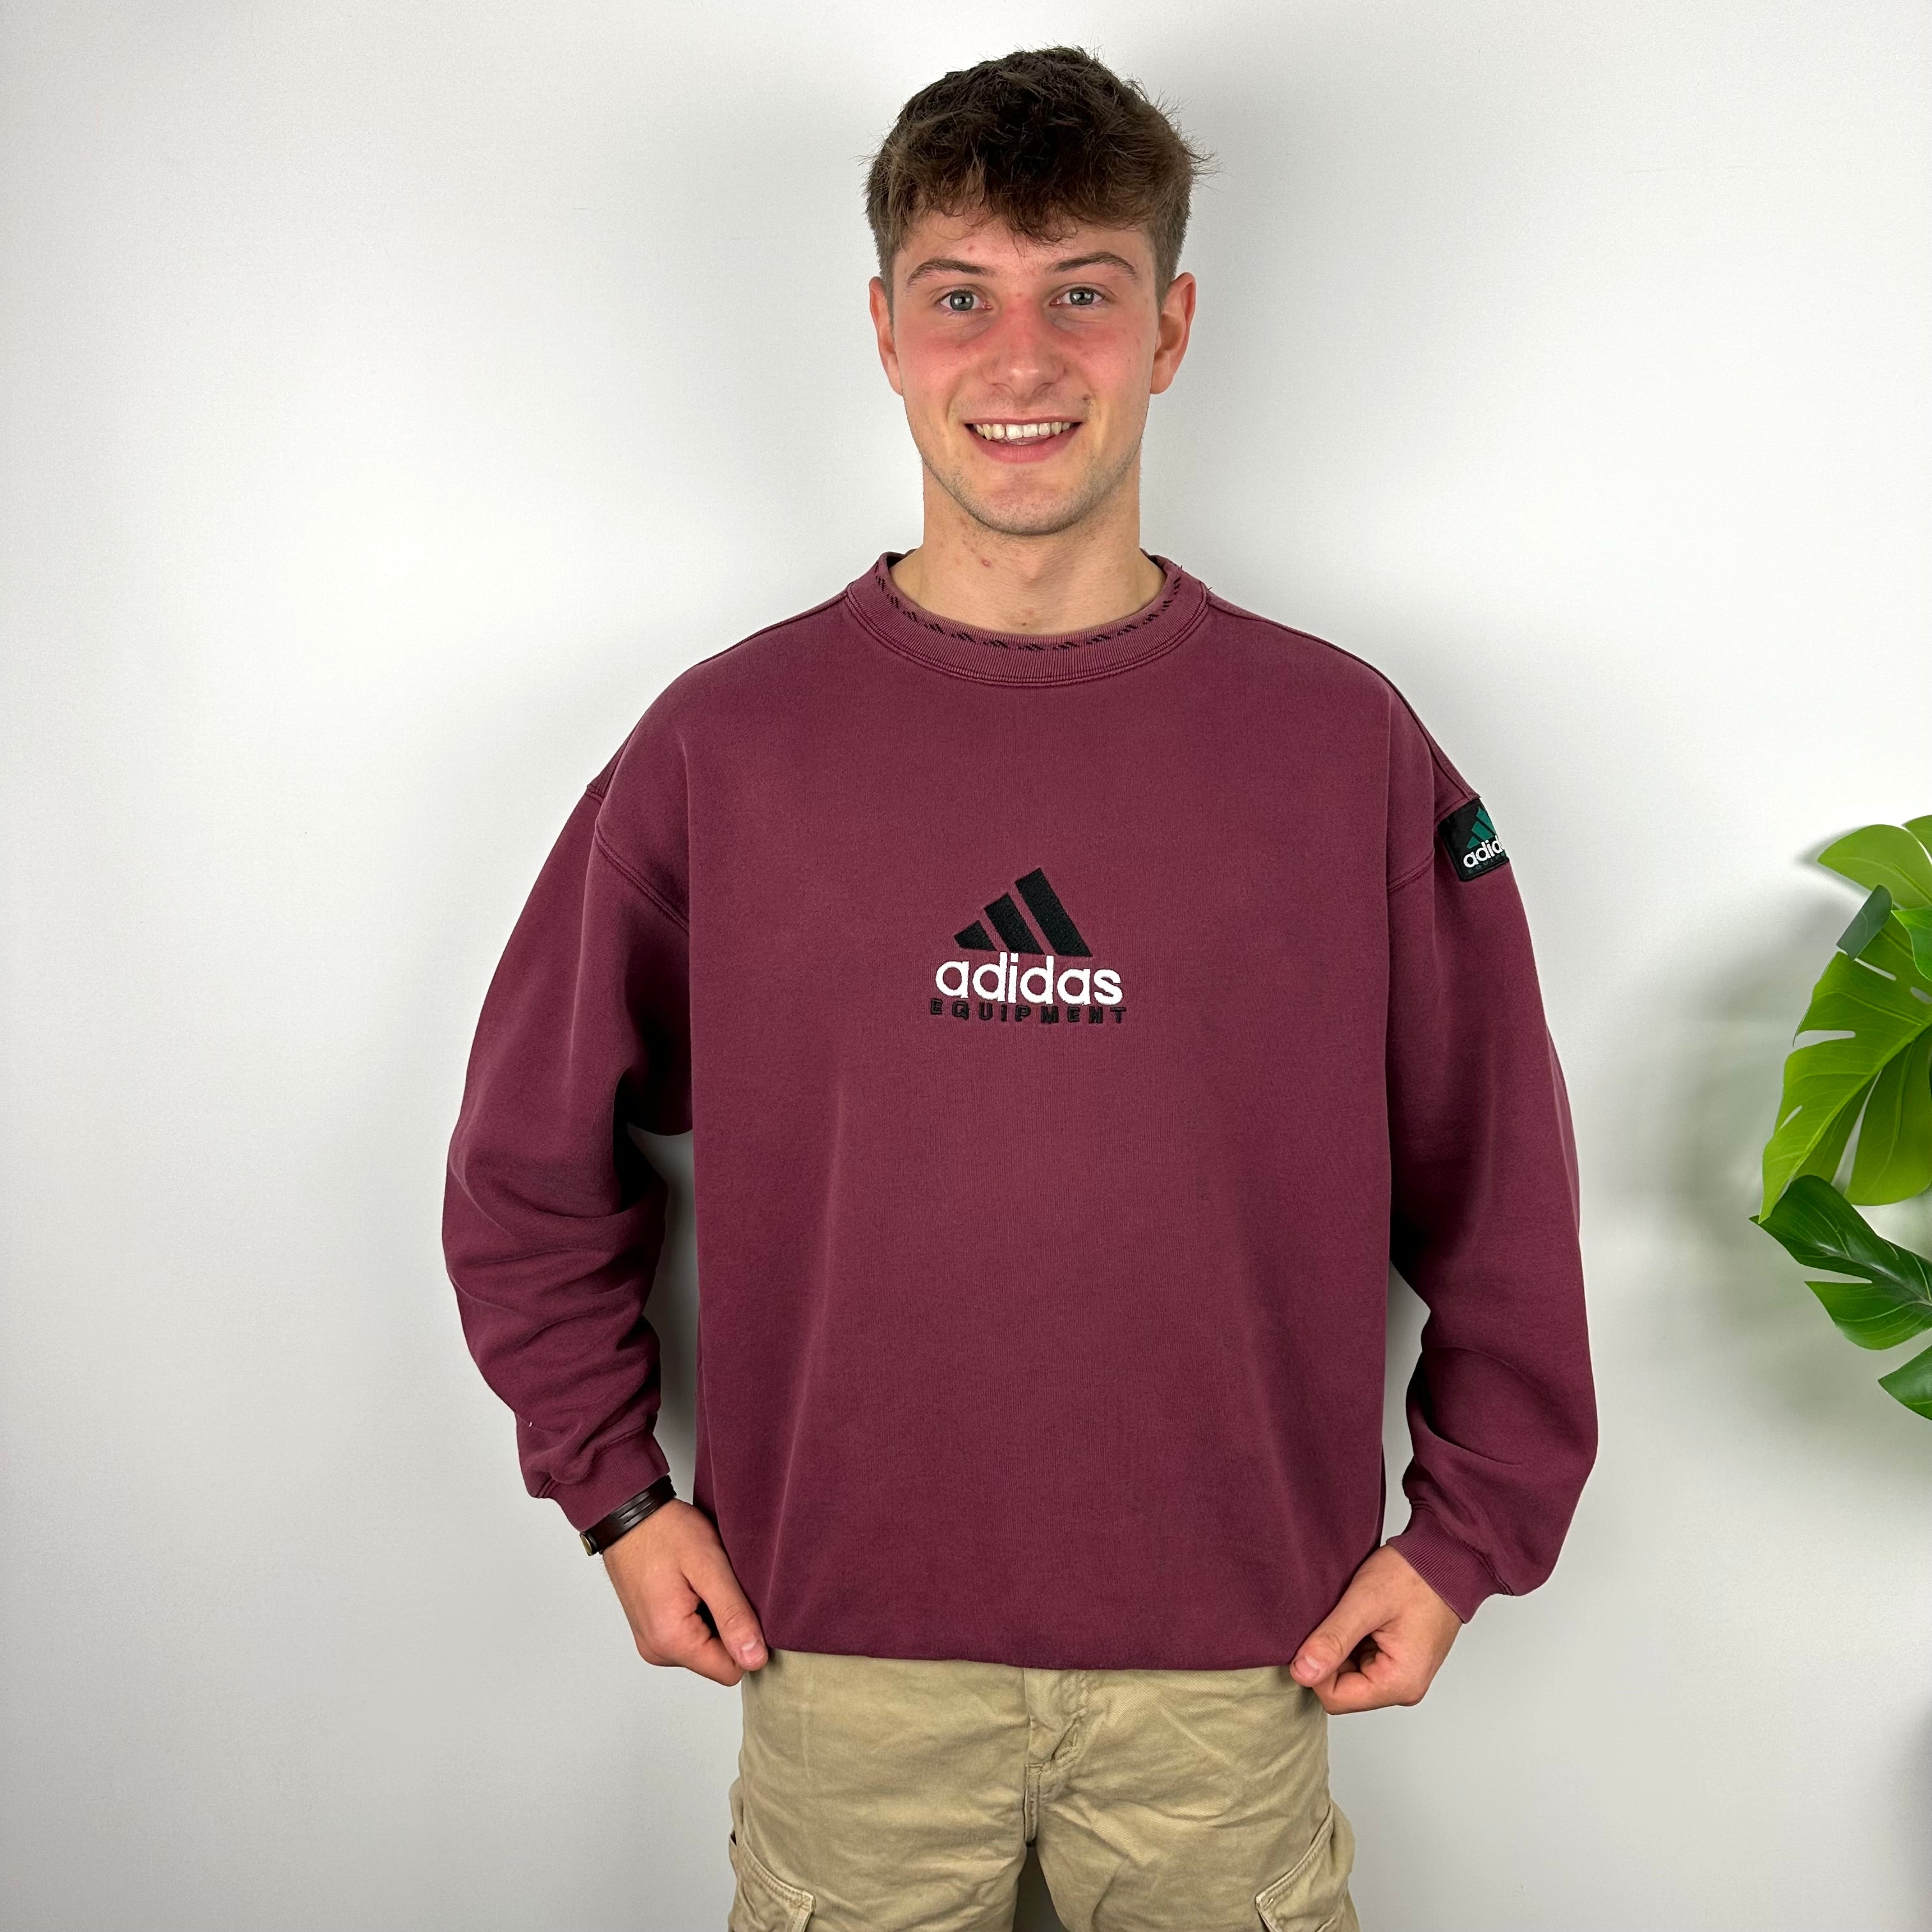 Adidas Equipment RARE Maroon Embroidered Spell Out Sweatshirt (L)